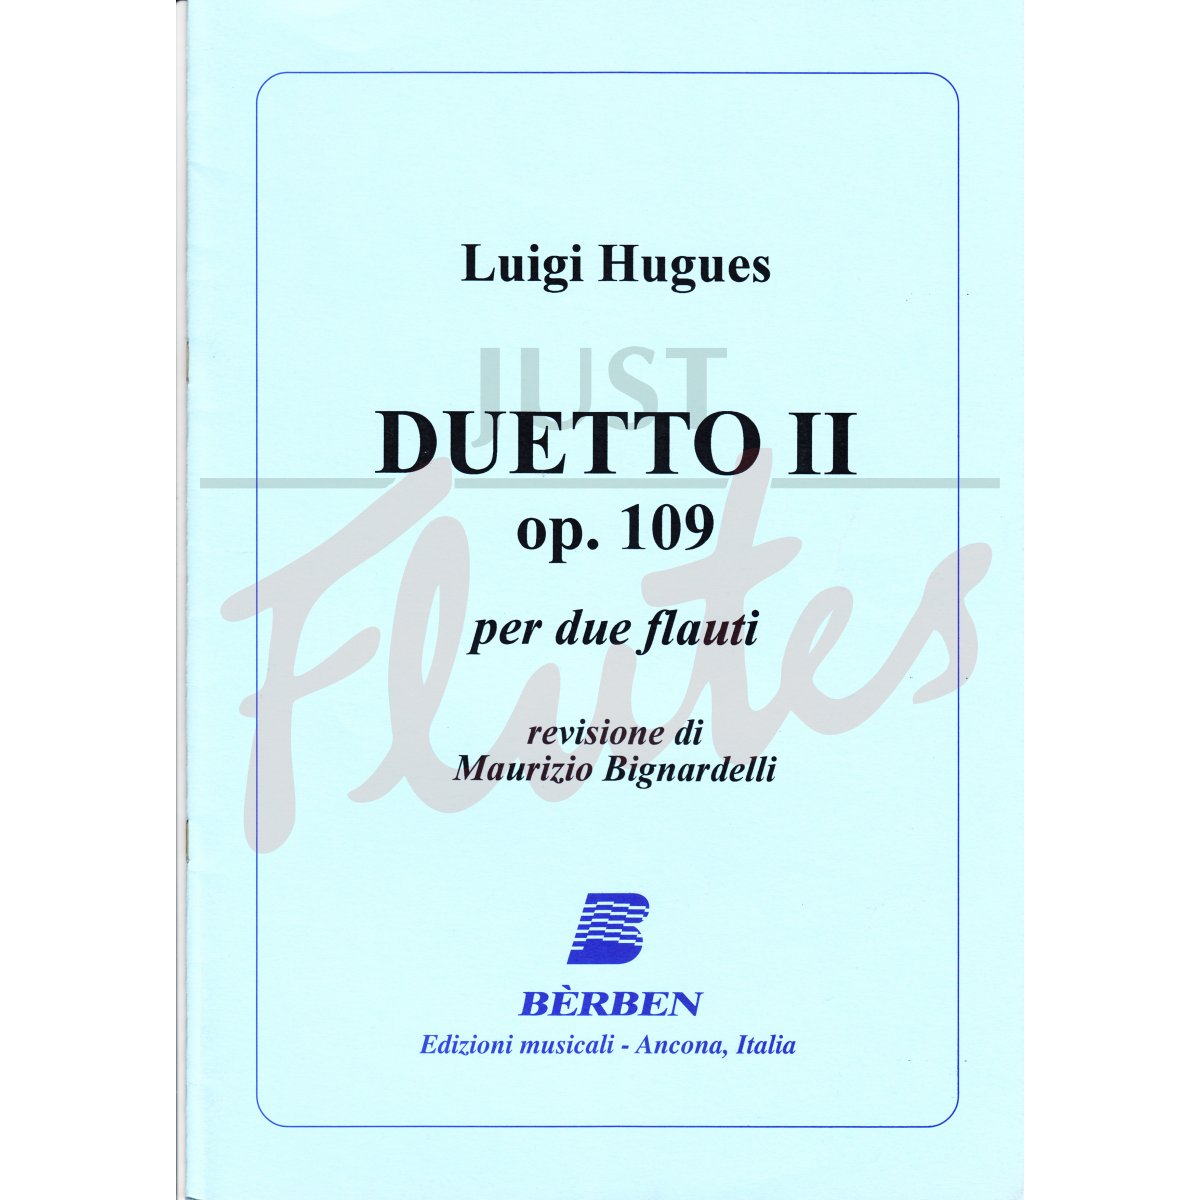 Duetto II for Two Flutes